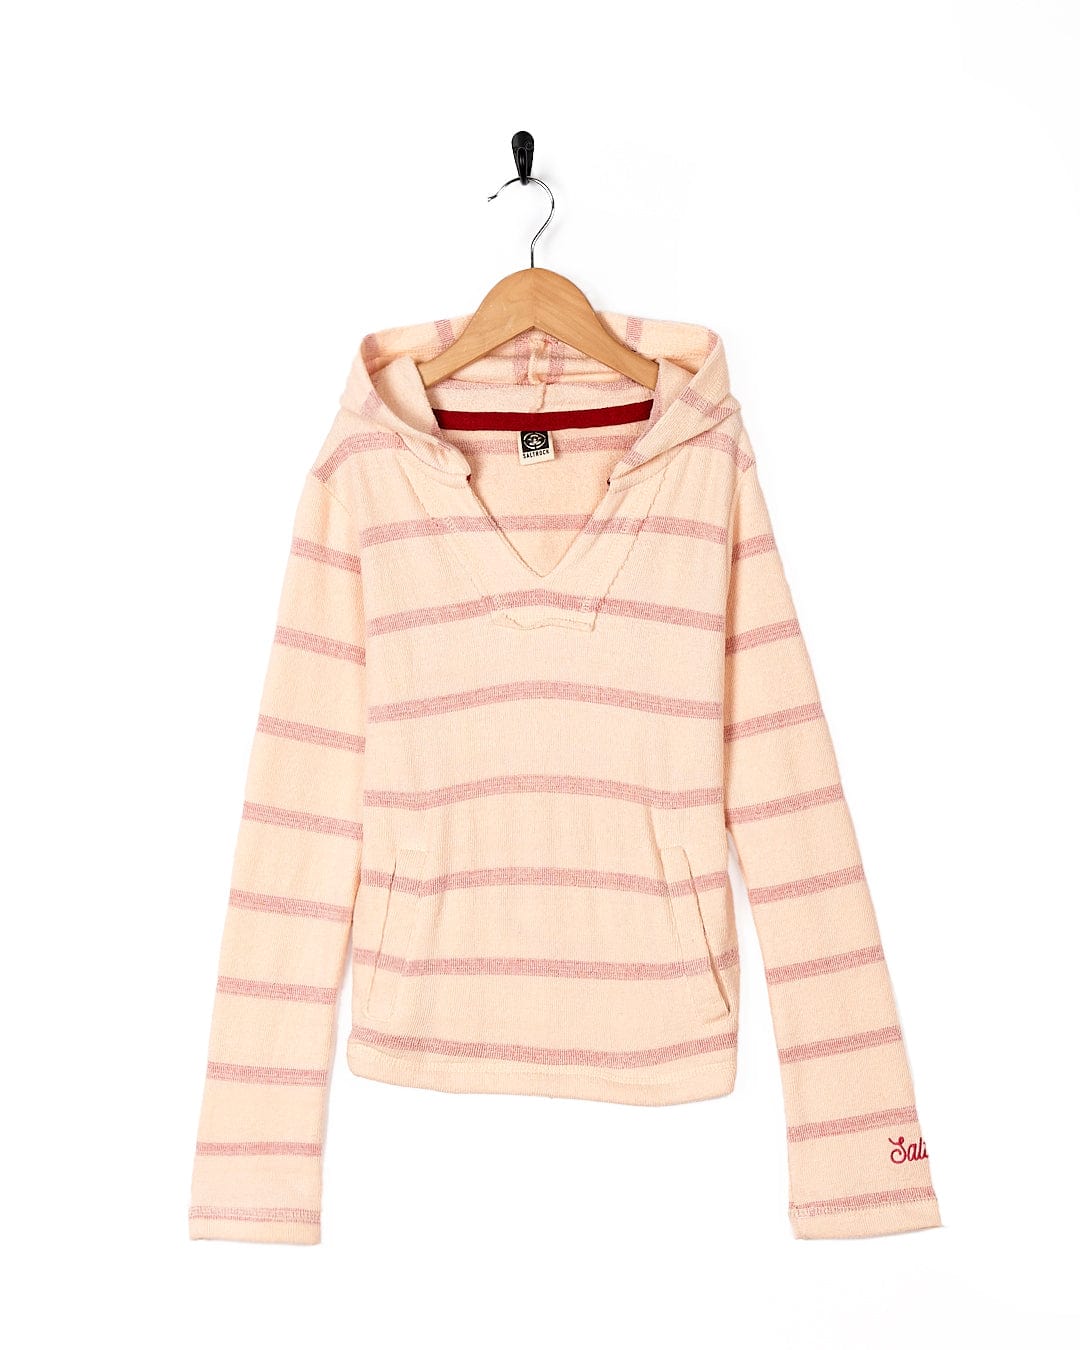 A girl's Kennedy - Kids Pop Hoodie - Coral by Saltrock hanging on a hanger.